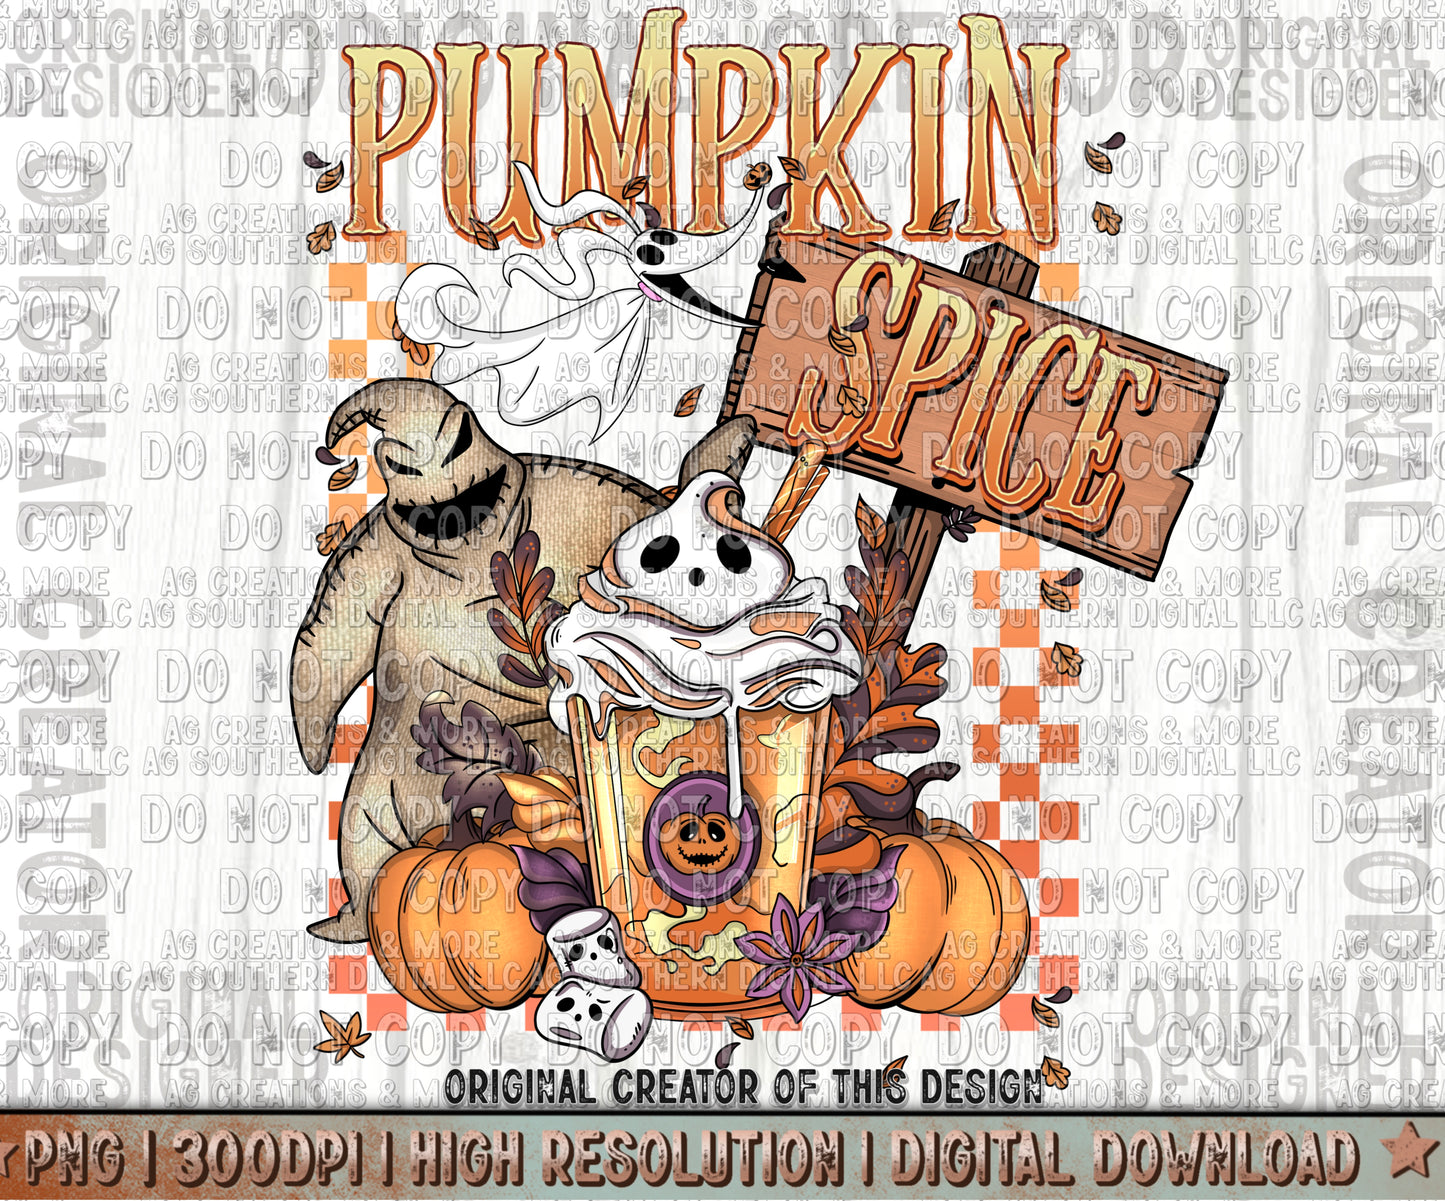 Boo Ribbon Crunch w/o Worms Digital Download PNG